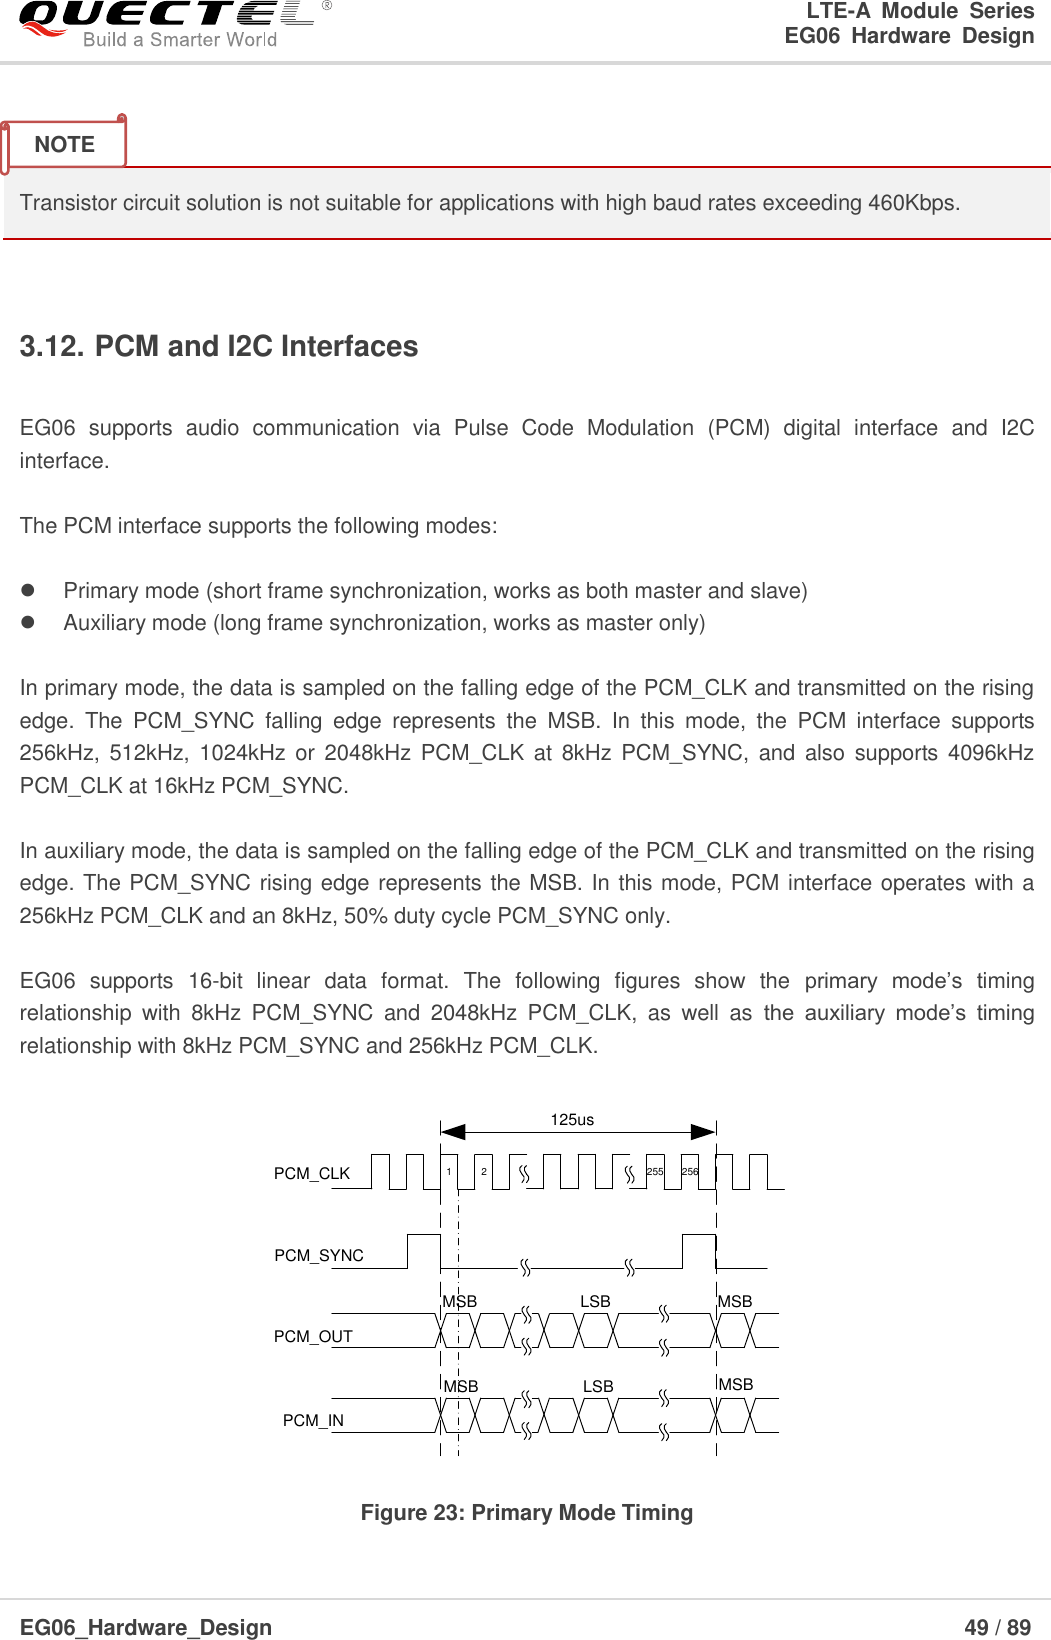 LTE-A  Module  Series                                                  EG06  Hardware  Design  EG06_Hardware_Design                                                               49 / 89      Transistor circuit solution is not suitable for applications with high baud rates exceeding 460Kbps.  3.12. PCM and I2C Interfaces  EG06  supports  audio  communication  via  Pulse  Code  Modulation  (PCM)  digital  interface  and  I2C interface.  The PCM interface supports the following modes:    Primary mode (short frame synchronization, works as both master and slave)   Auxiliary mode (long frame synchronization, works as master only)  In primary mode, the data is sampled on the falling edge of the PCM_CLK and transmitted on the rising edge.  The  PCM_SYNC  falling  edge  represents  the  MSB.  In  this  mode,  the  PCM  interface  supports 256kHz, 512kHz,  1024kHz or  2048kHz  PCM_CLK  at  8kHz  PCM_SYNC,  and  also  supports 4096kHz PCM_CLK at 16kHz PCM_SYNC.  In auxiliary mode, the data is sampled on the falling edge of the PCM_CLK and transmitted on the rising edge. The PCM_SYNC rising edge represents the MSB. In this mode, PCM interface operates with a 256kHz PCM_CLK and an 8kHz, 50% duty cycle PCM_SYNC only.  EG06  supports  16-bit  linear  data  format.  The  following  figures  show  the  primary  mode’s  timing relationship  with  8kHz  PCM_SYNC  and  2048kHz  PCM_CLK,  as  well  as  the  auxiliary  mode’s  timing relationship with 8kHz PCM_SYNC and 256kHz PCM_CLK. PCM_CLKPCM_SYNCPCM_OUTMSB LSB MSB125us1 2 256255PCM_INMSBLSBMSB Figure 23: Primary Mode Timing NOTE 